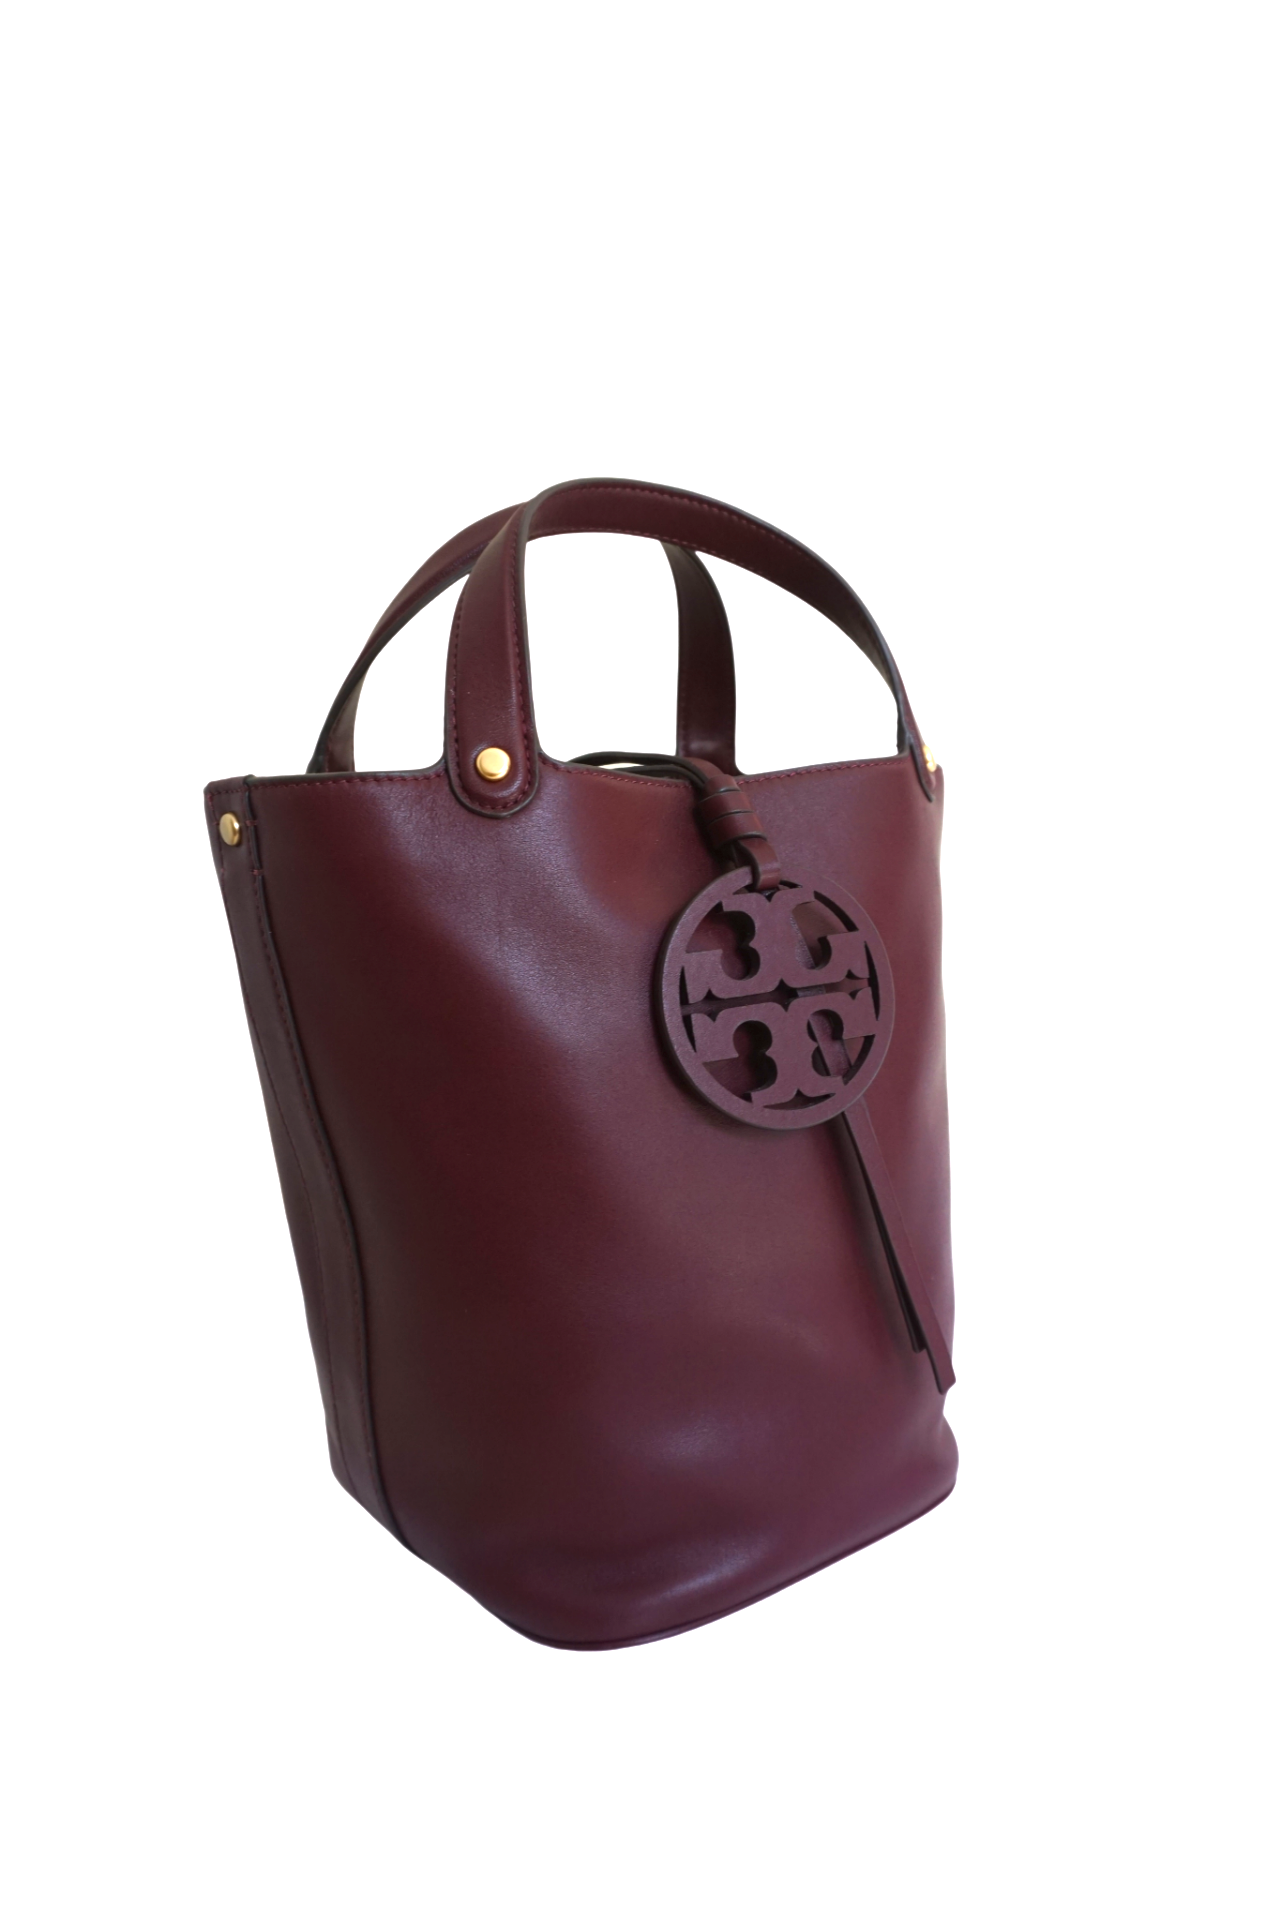 Tory Burch Leather Shopping Tote